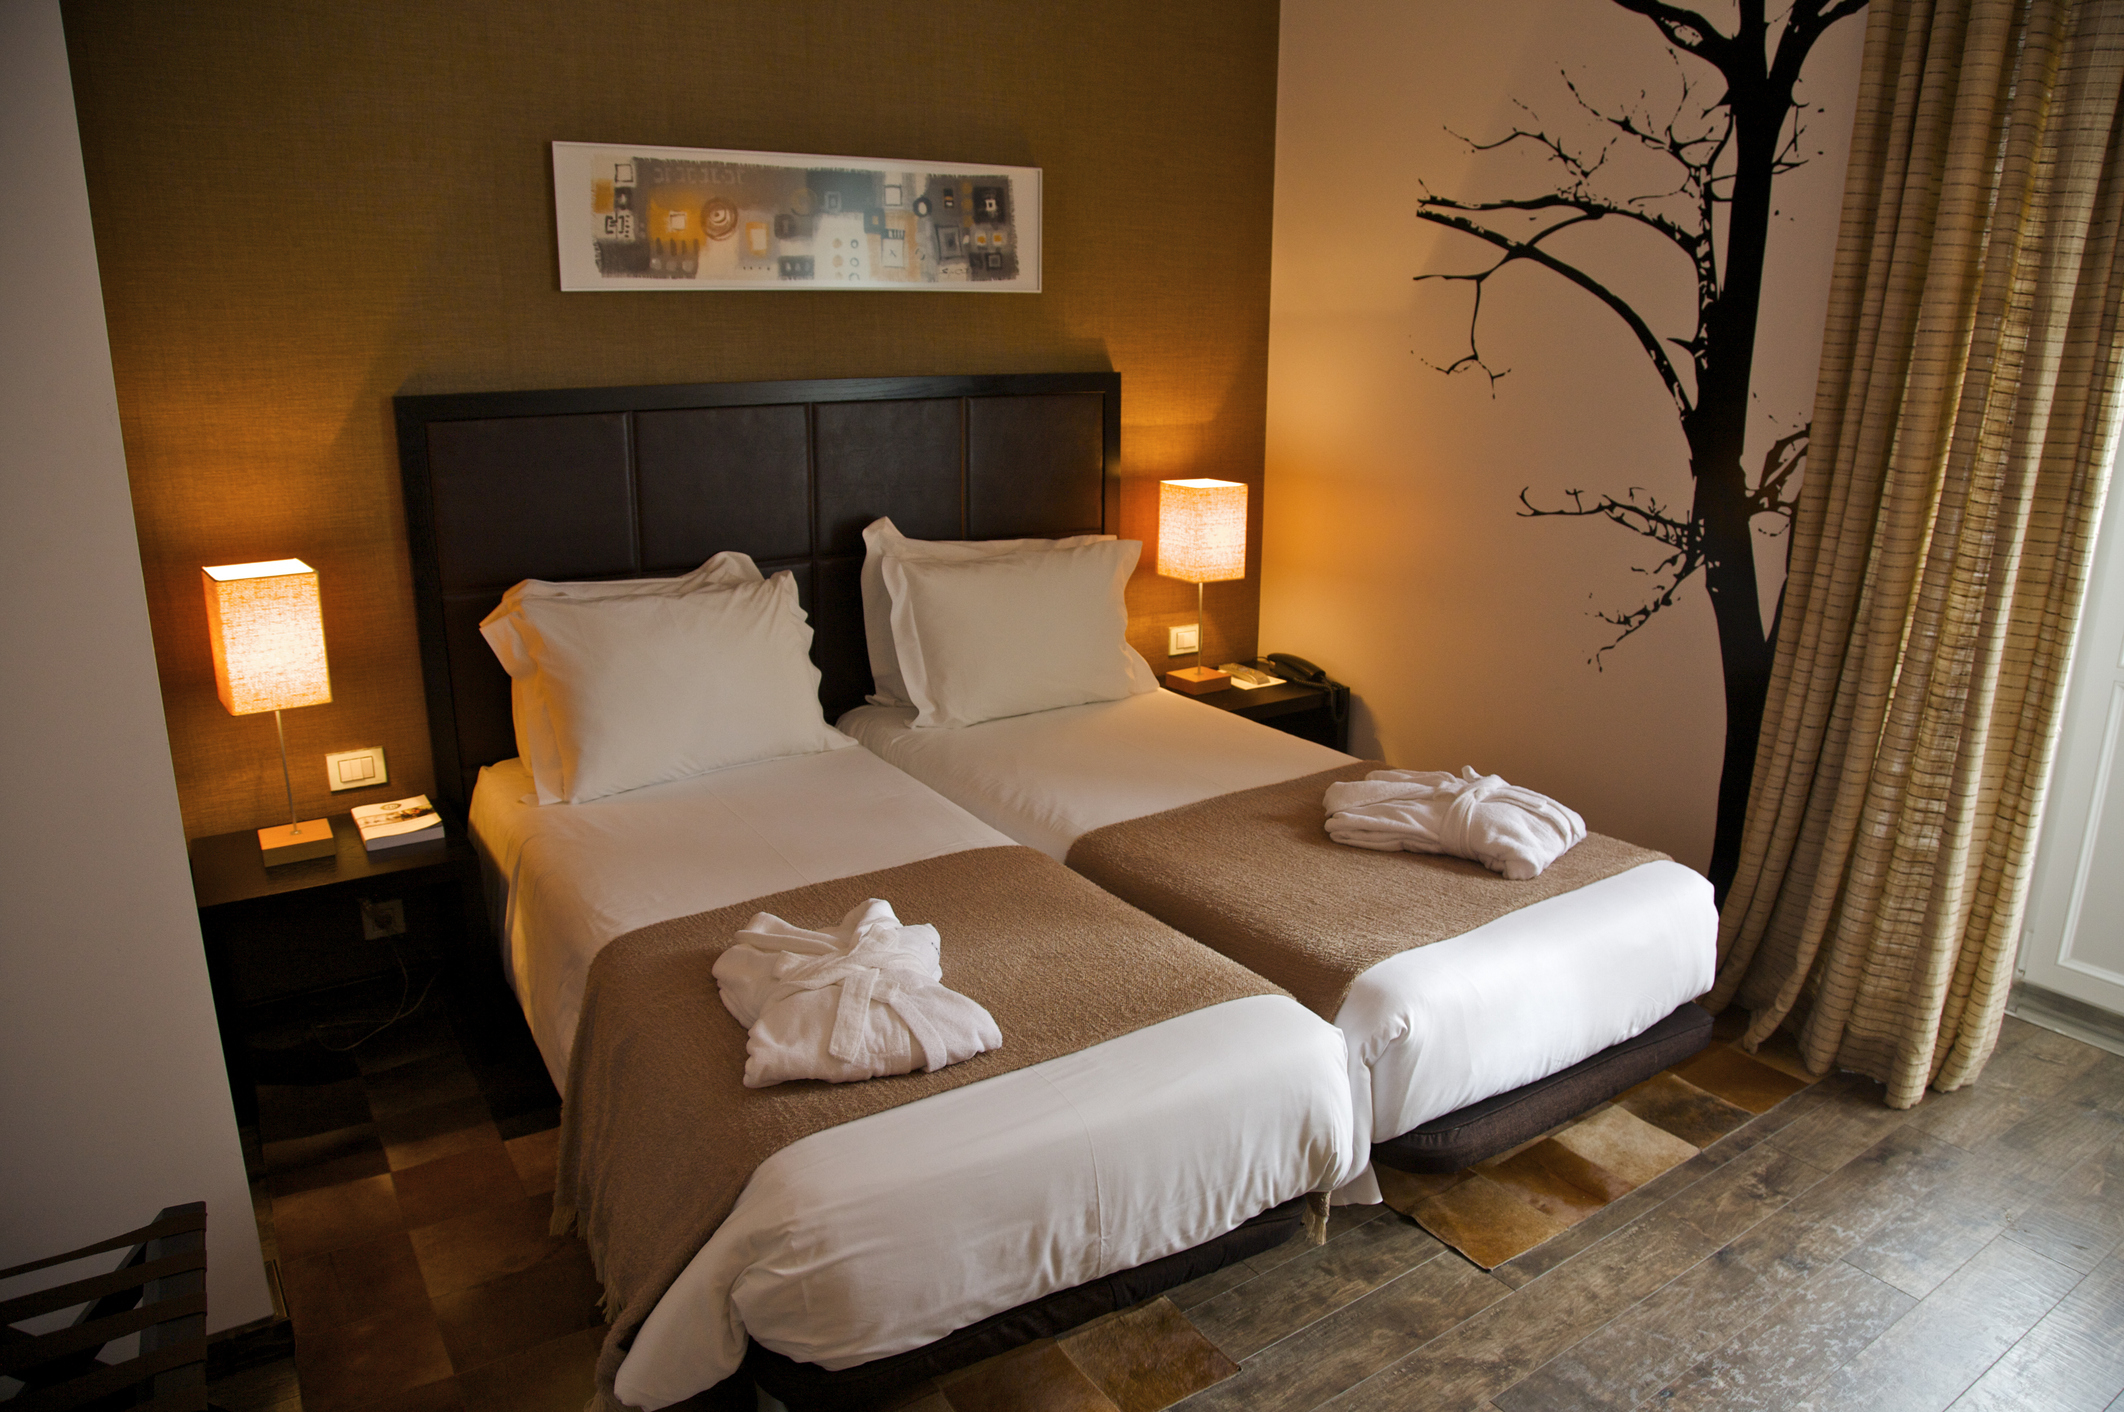 Hotel room with two beds pushed together, nightstands with lamps, and a decorative wall tree